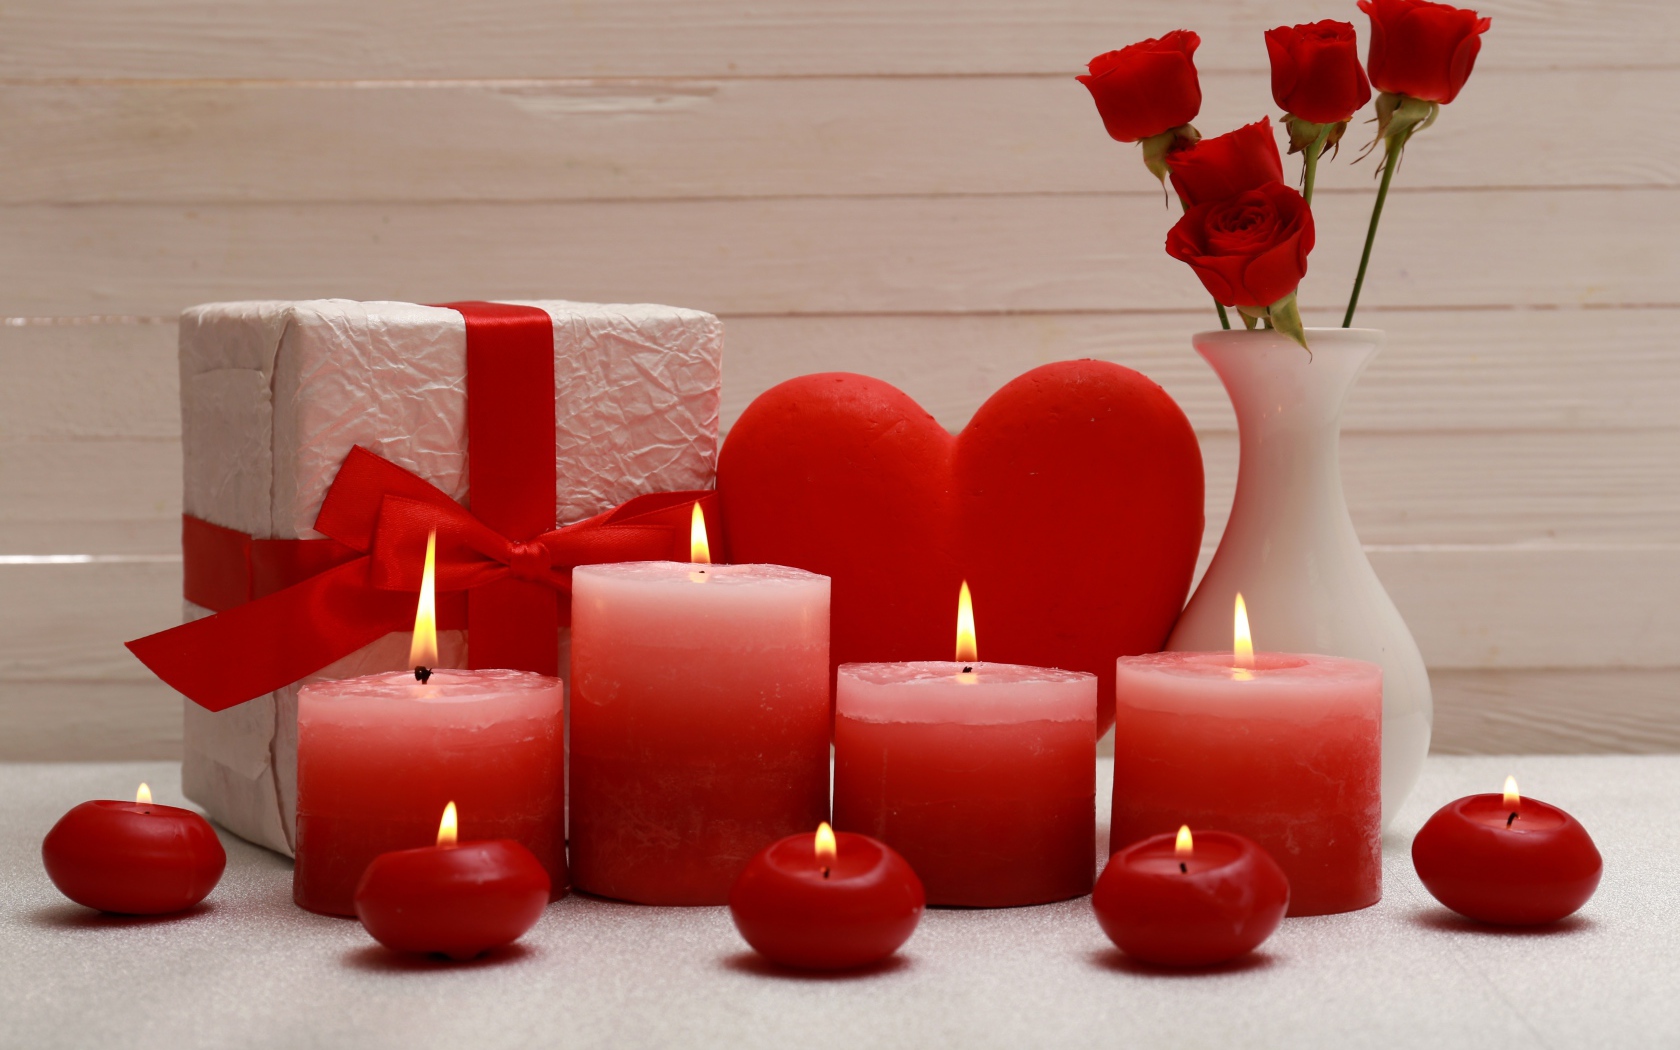 Lighted red candles on the table with a gift, red heart and flowers in a vase